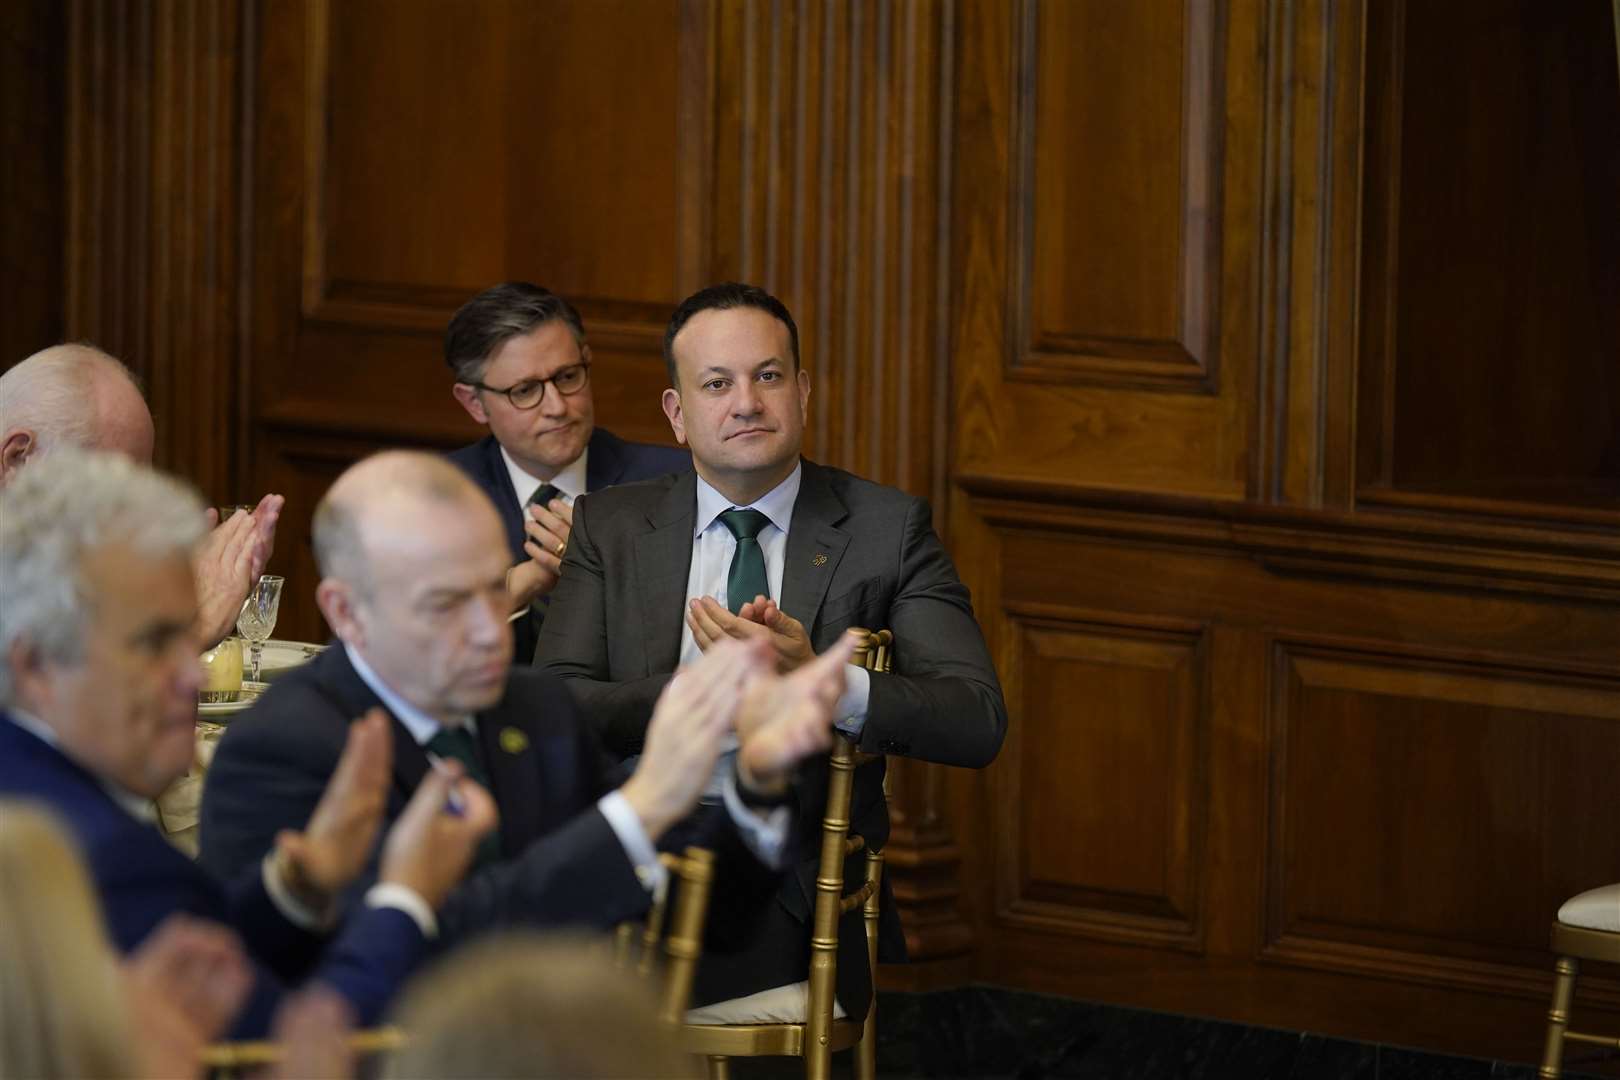 Taoiseach Leo Varadkar during the annual ‘Friends of Ireland Luncheon’ hosted by Speaker Mike Johnson on Capitol Hill in Washington, DC. (Niall Carson/PA)